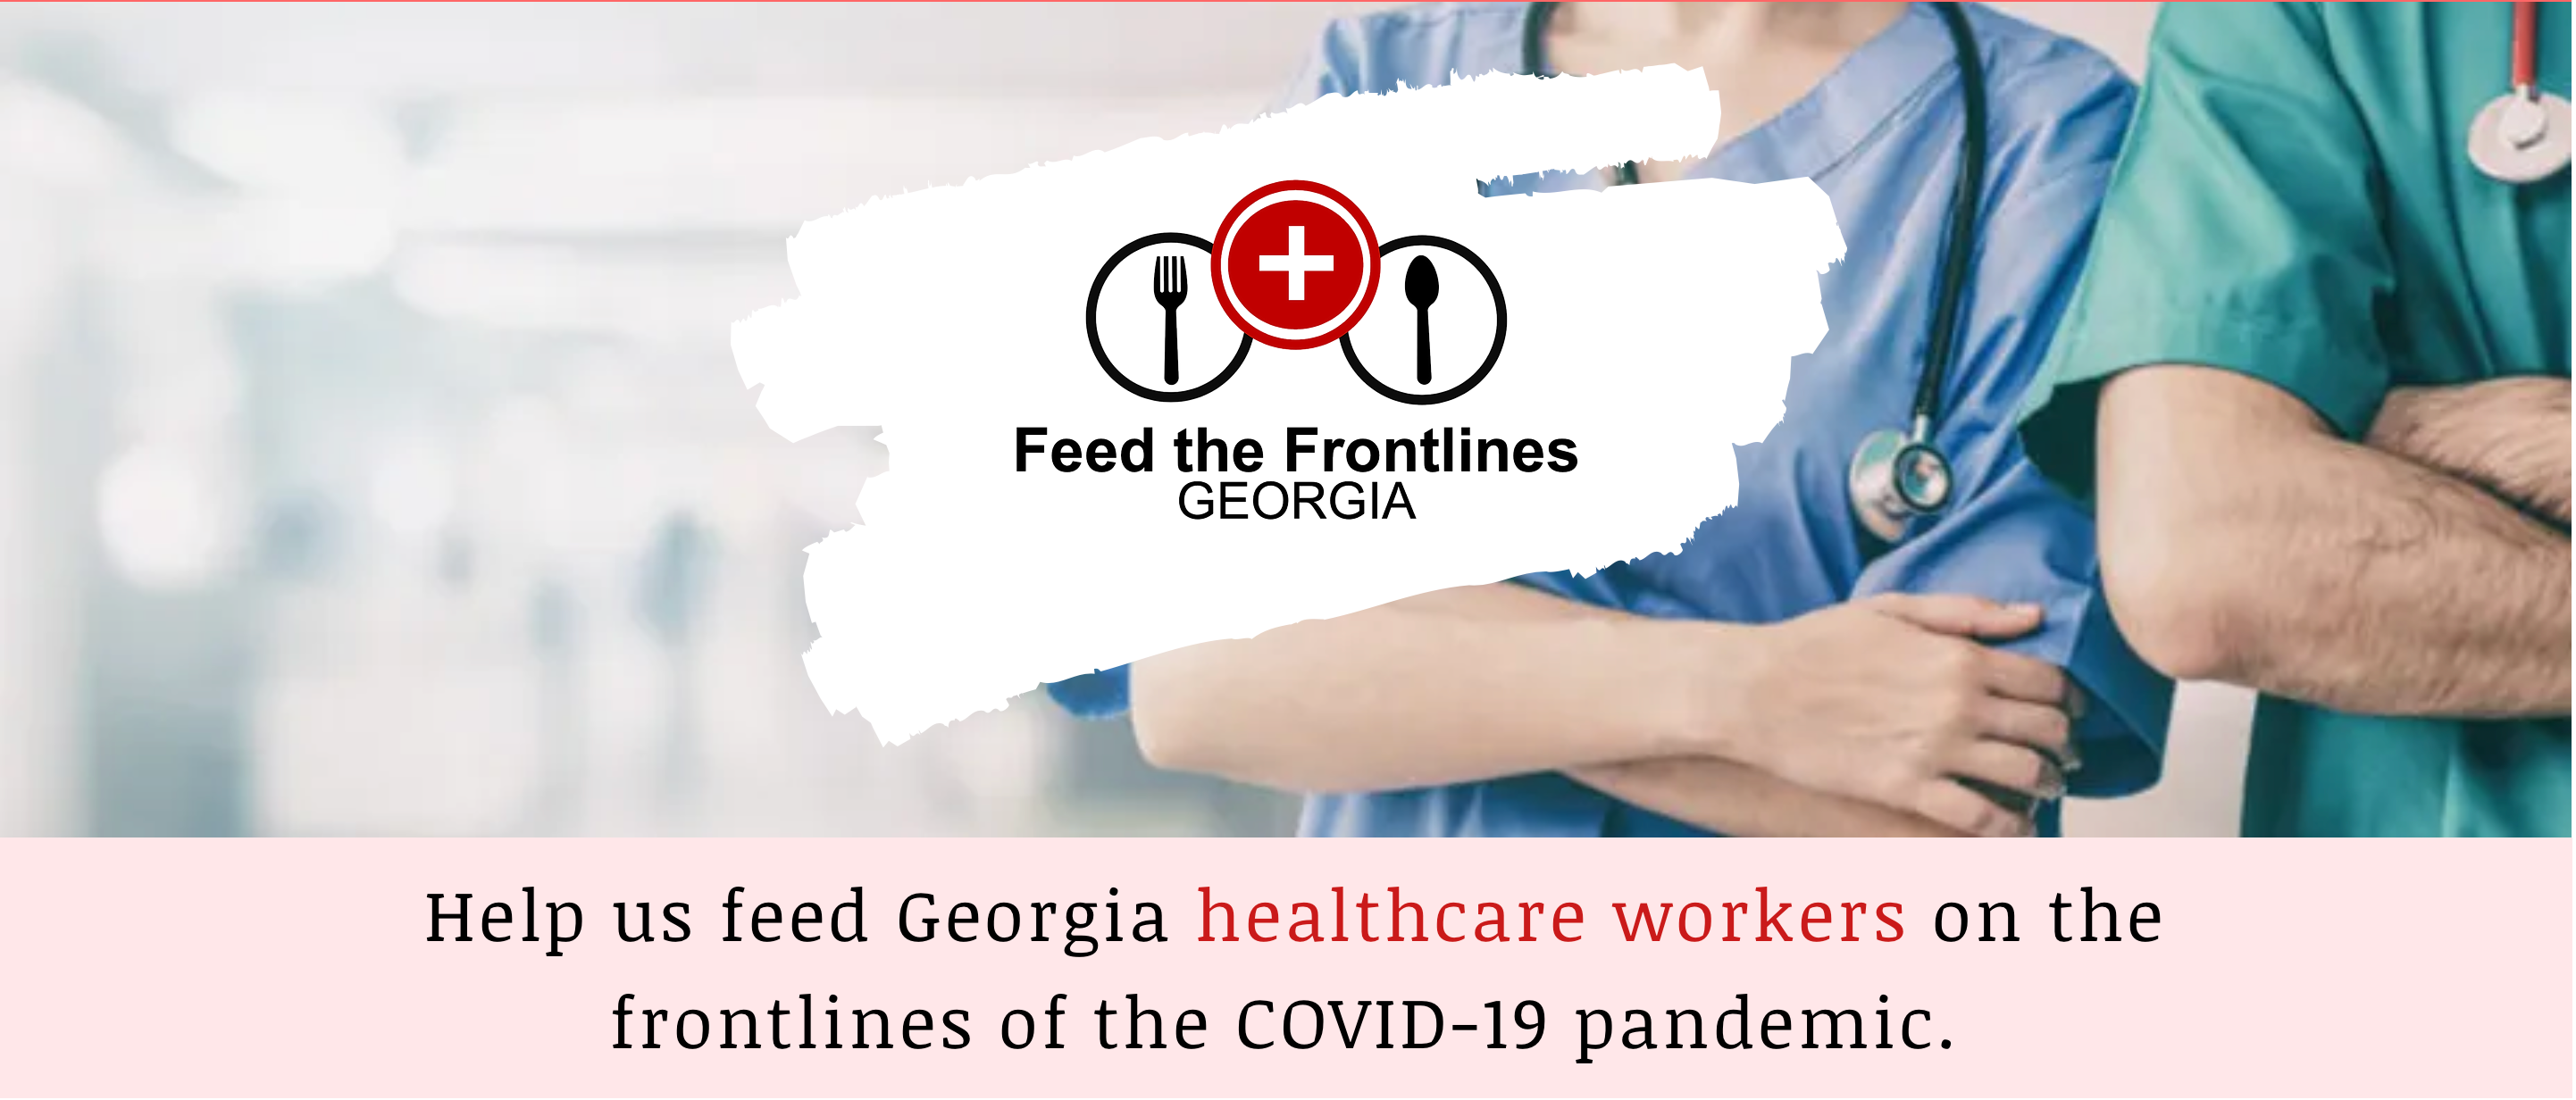 Feed the Frontlines Georgia